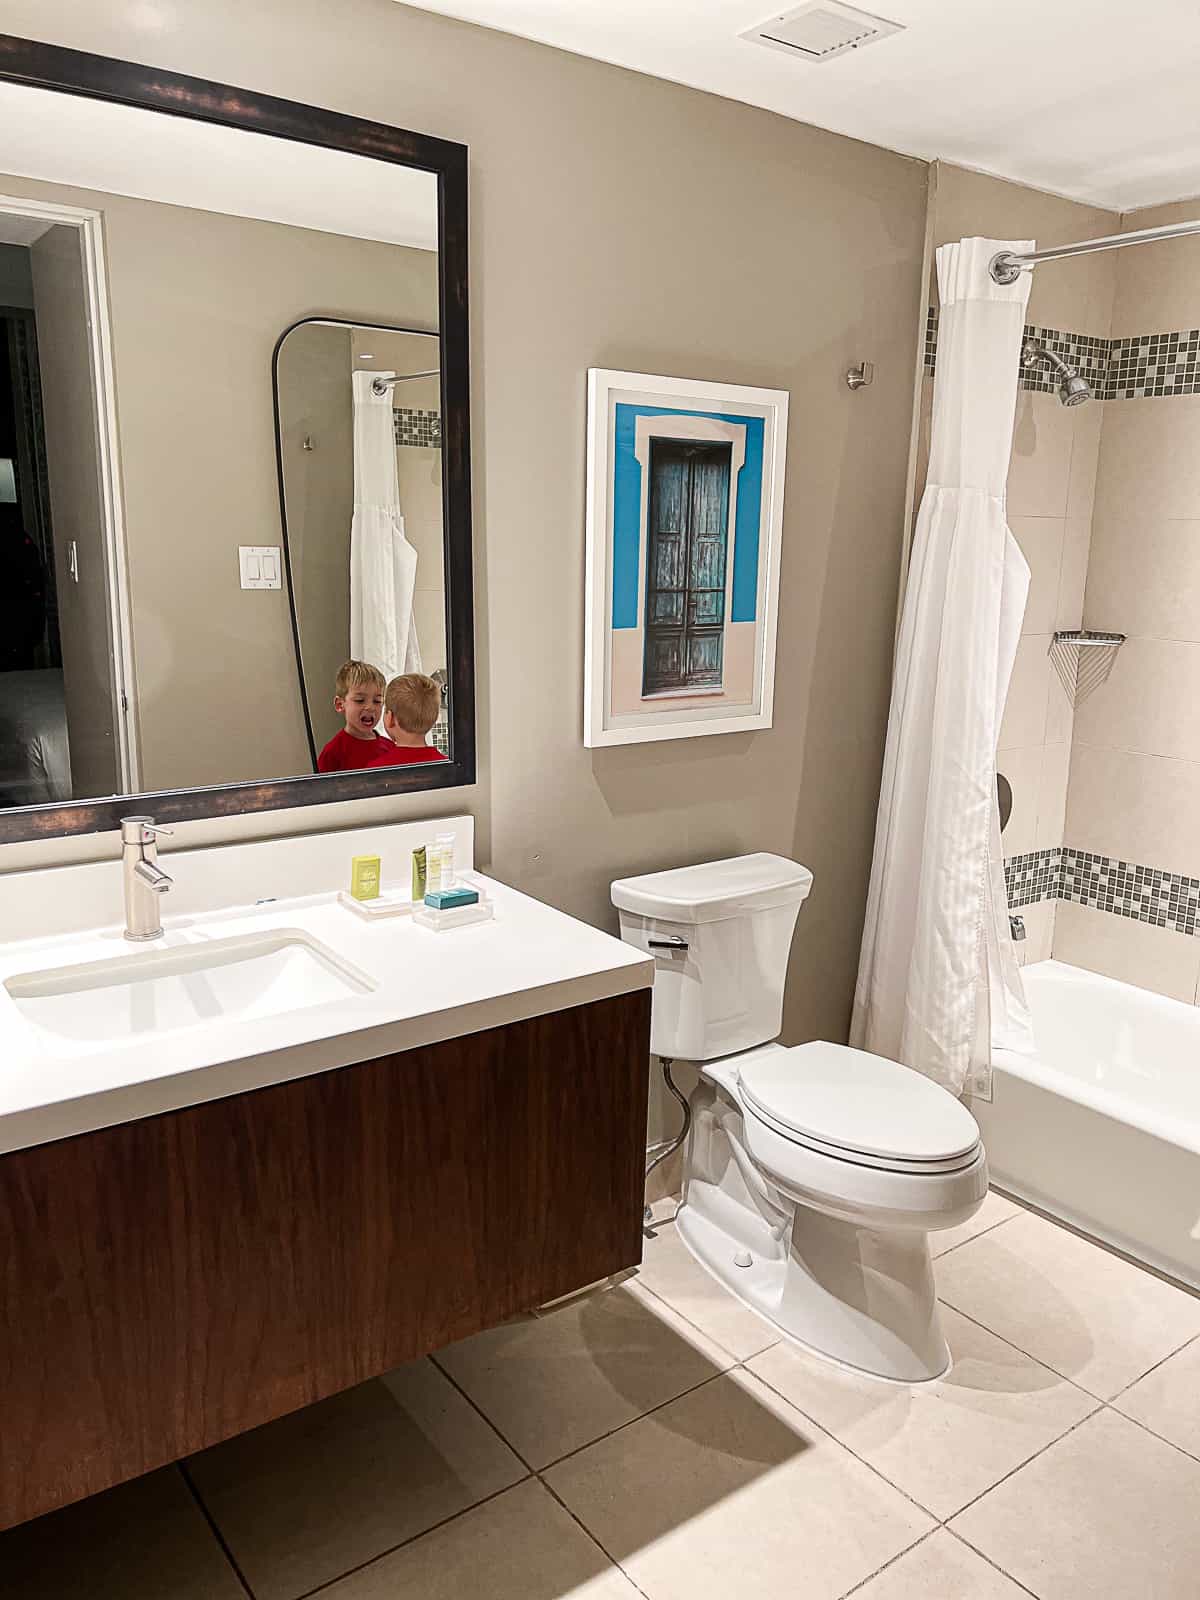 Bathroom sink and toiled inside Caribe Hilton Suites in Puerto Rico